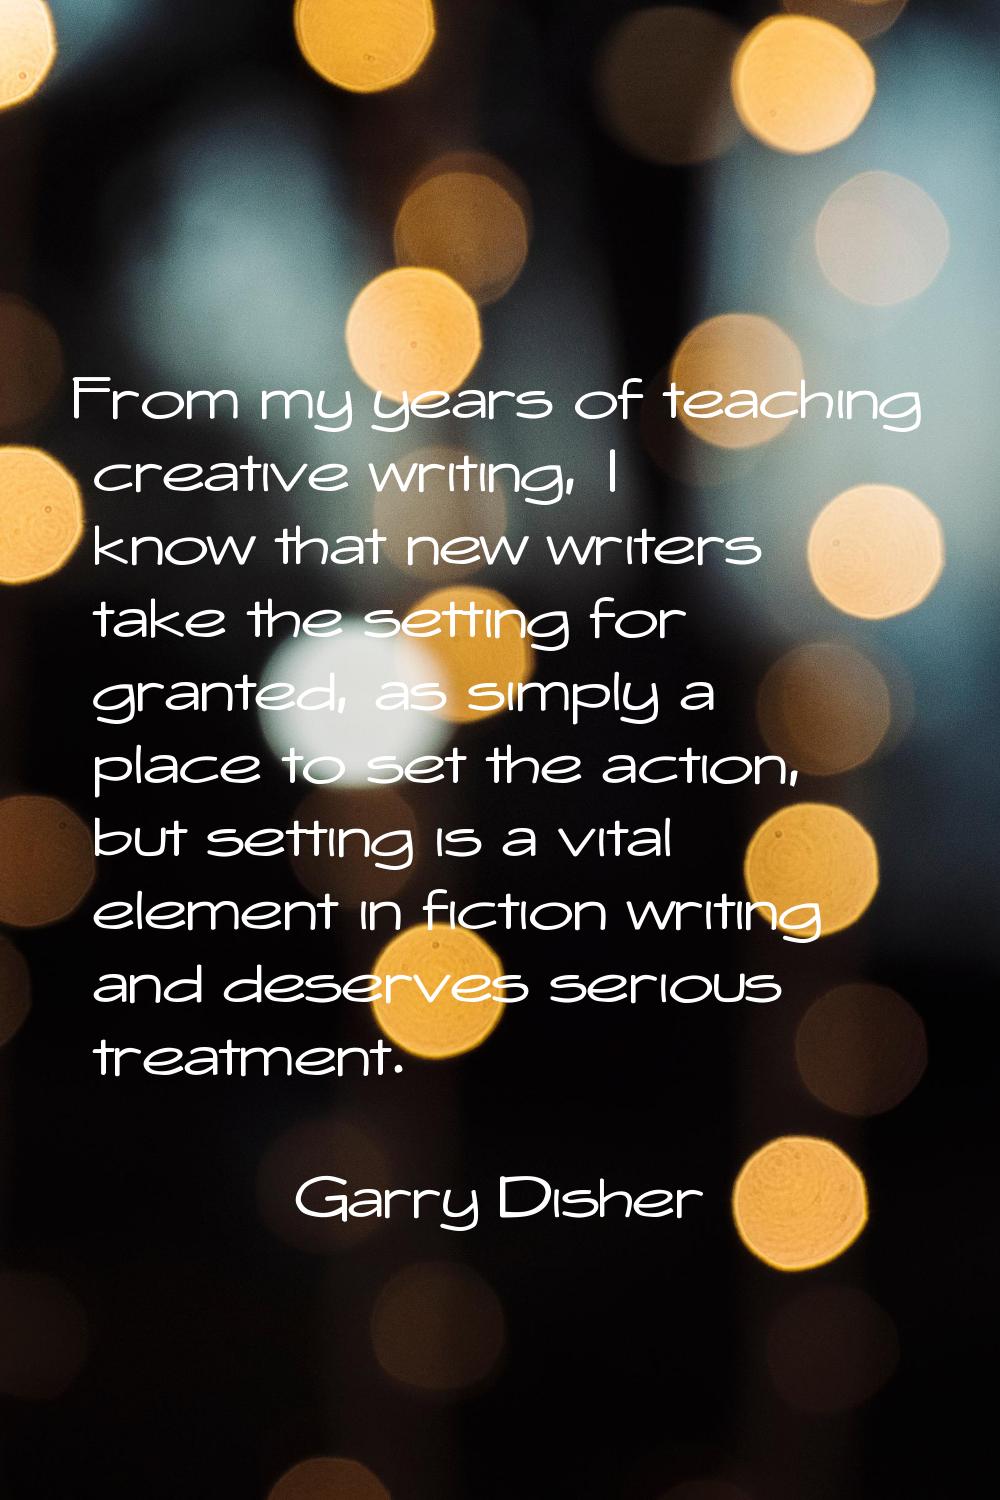 From my years of teaching creative writing, I know that new writers take the setting for granted, a